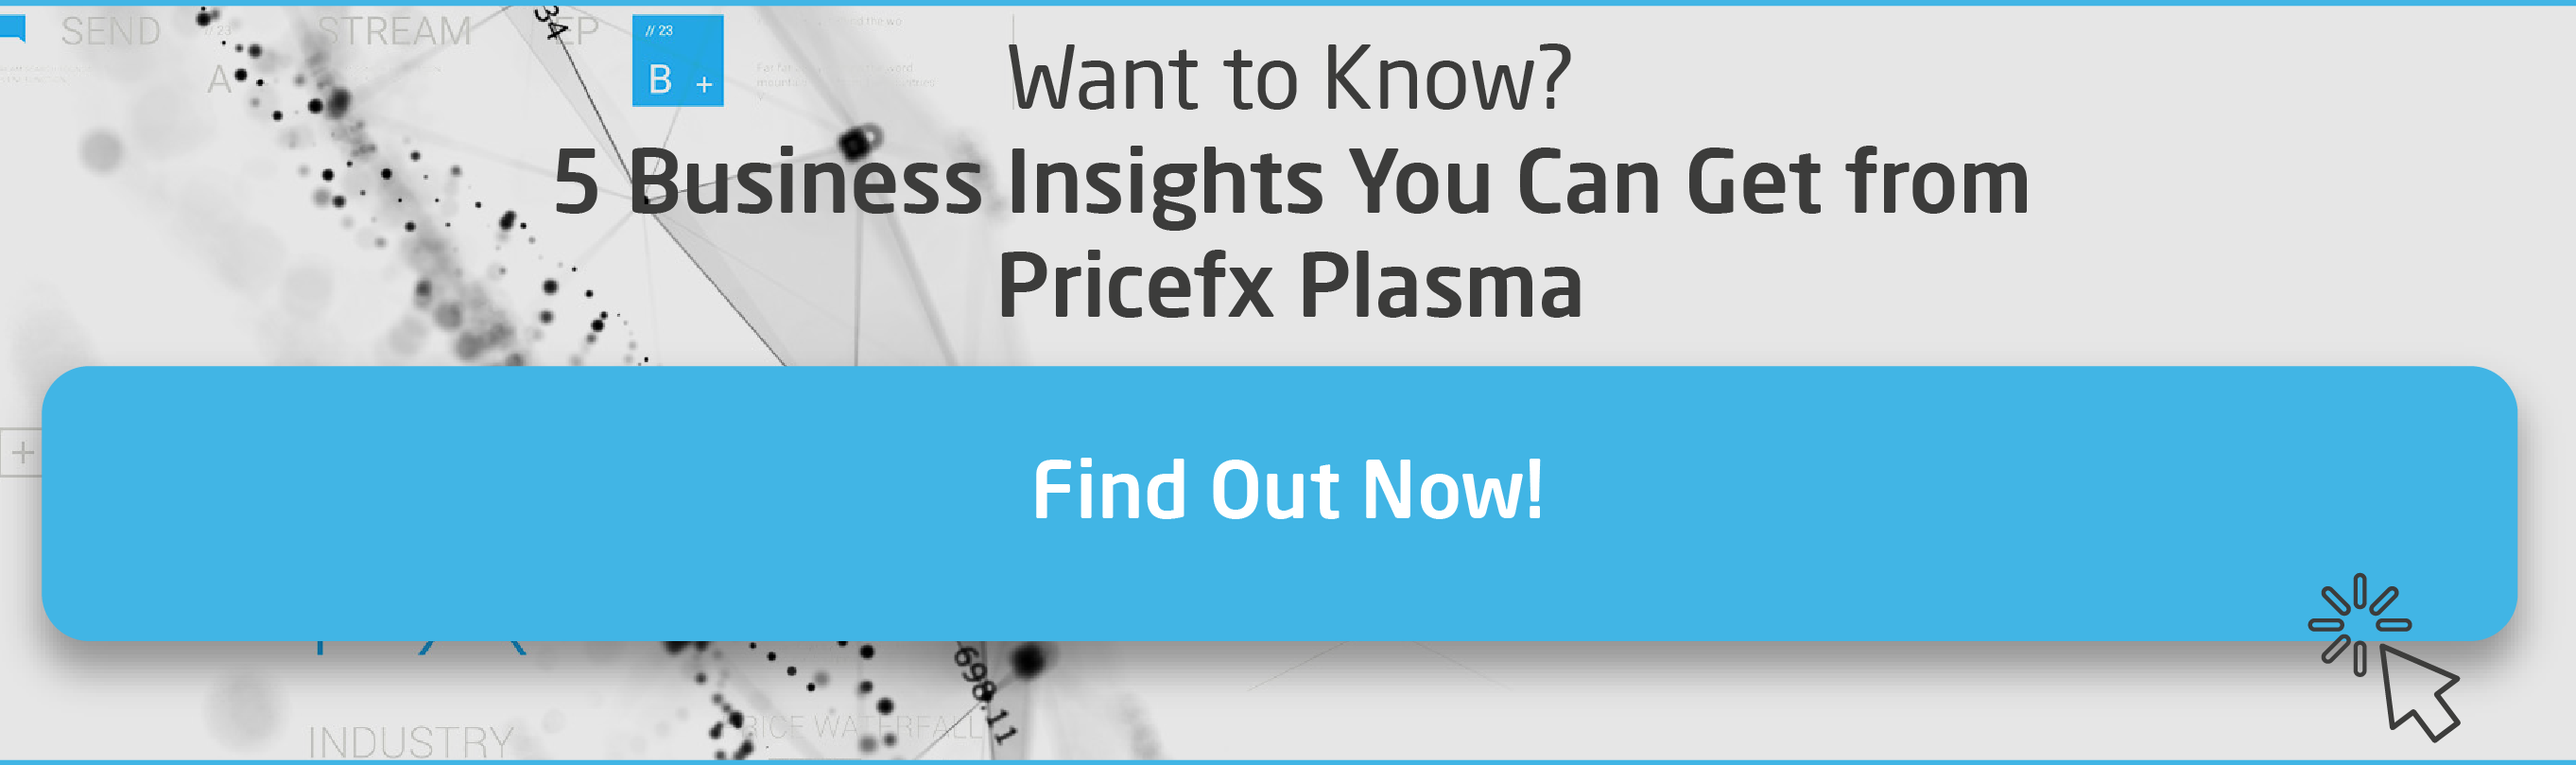 CTA-5-Business-Insights-You-Can-Get-from-Pricefx-Plasma